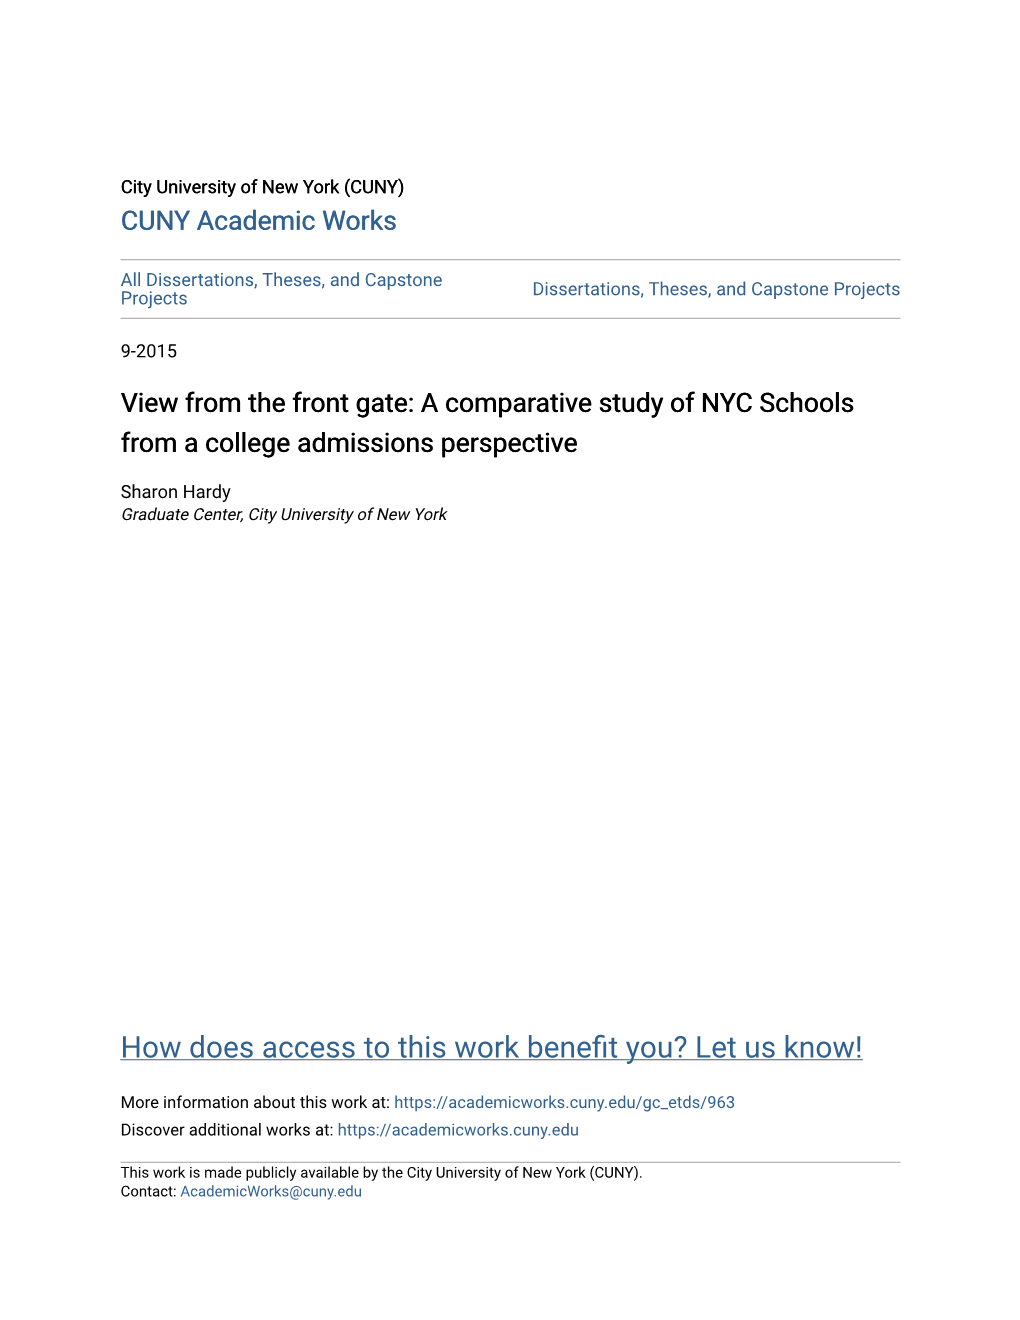 A Comparative Study of NYC Schools from a College Admissions Perspective